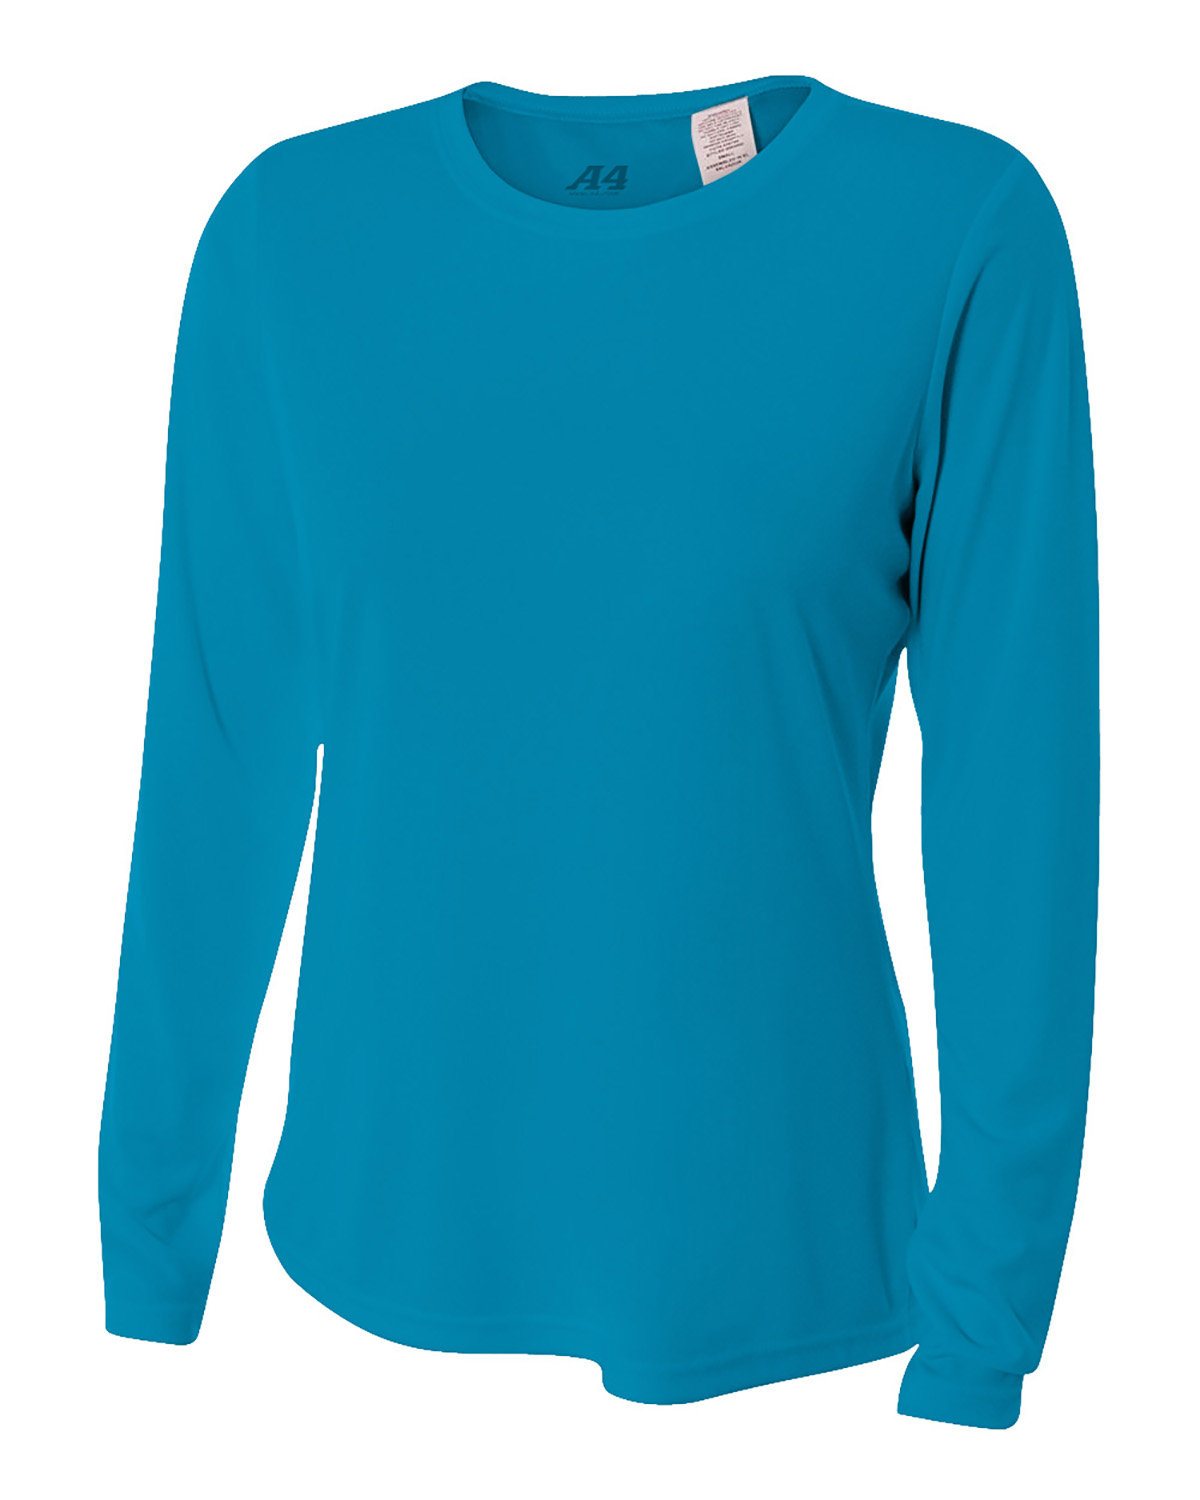 A4 Ladies' Long Sleeve Cooling Performance Crew Shirt ELECTRIC BLUE 